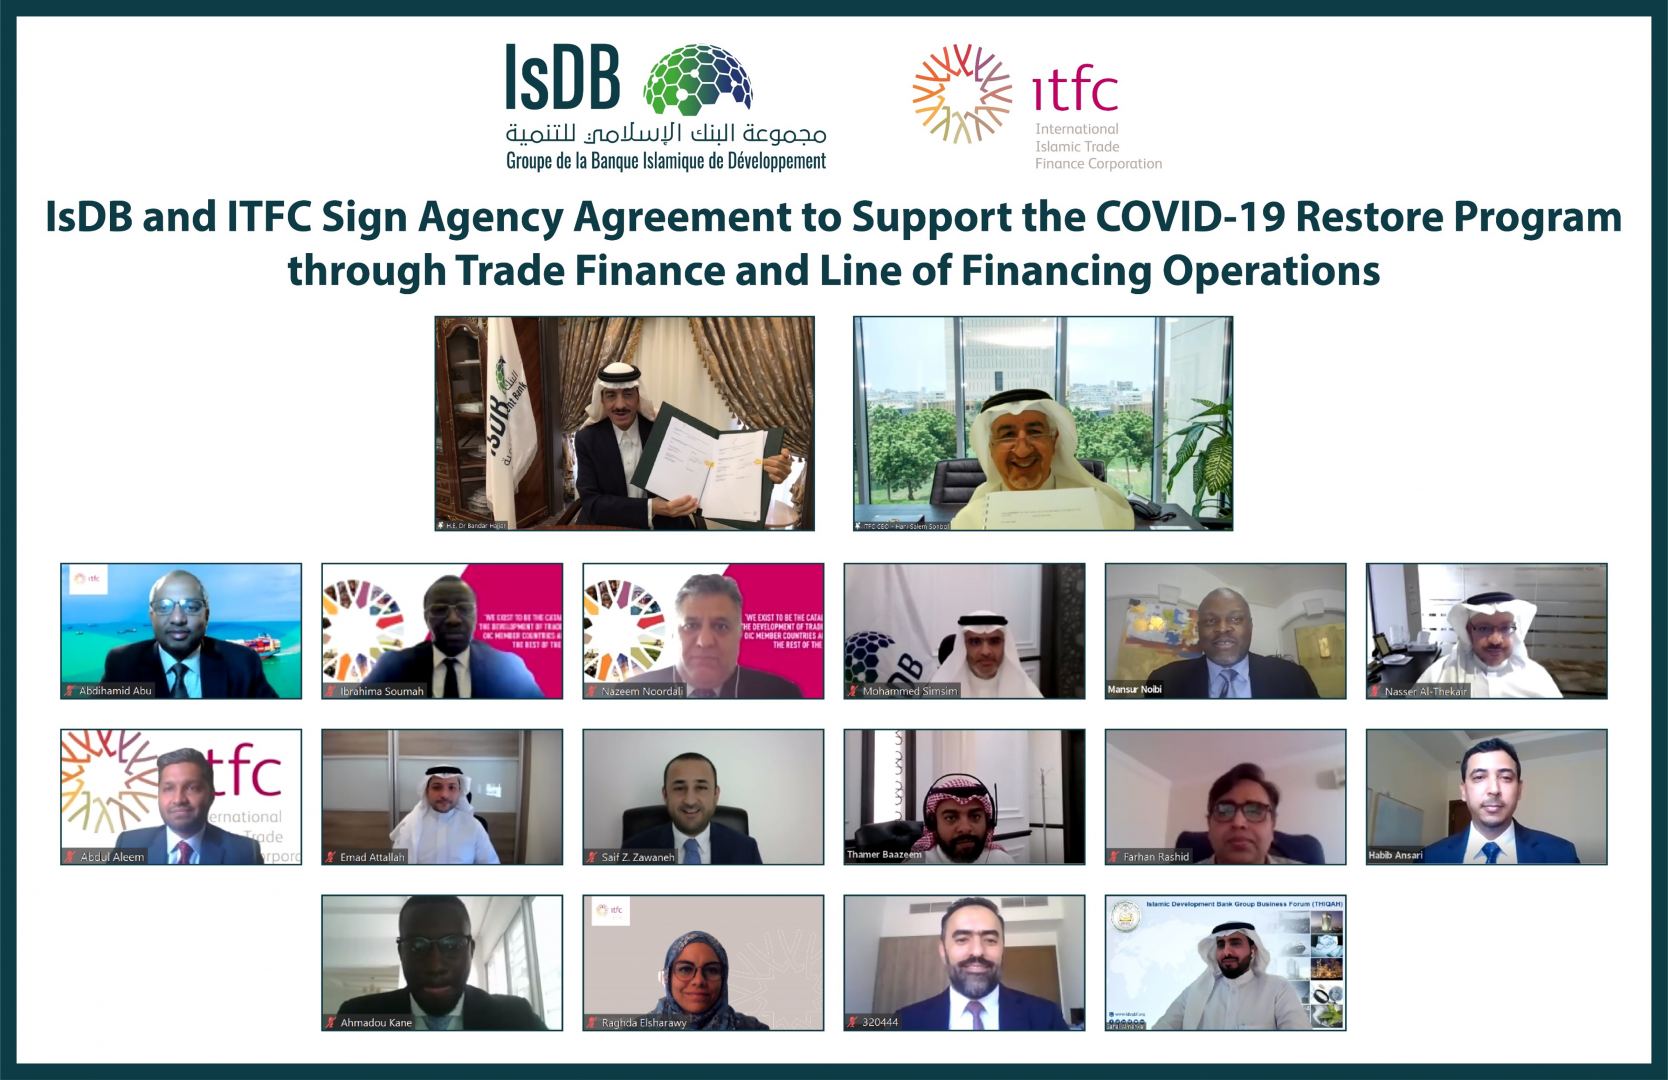 IsDB and ITFC Sign Agency Agreement to Support COVID-19 Restore Program through Trade Finance and Line of Financing Operations